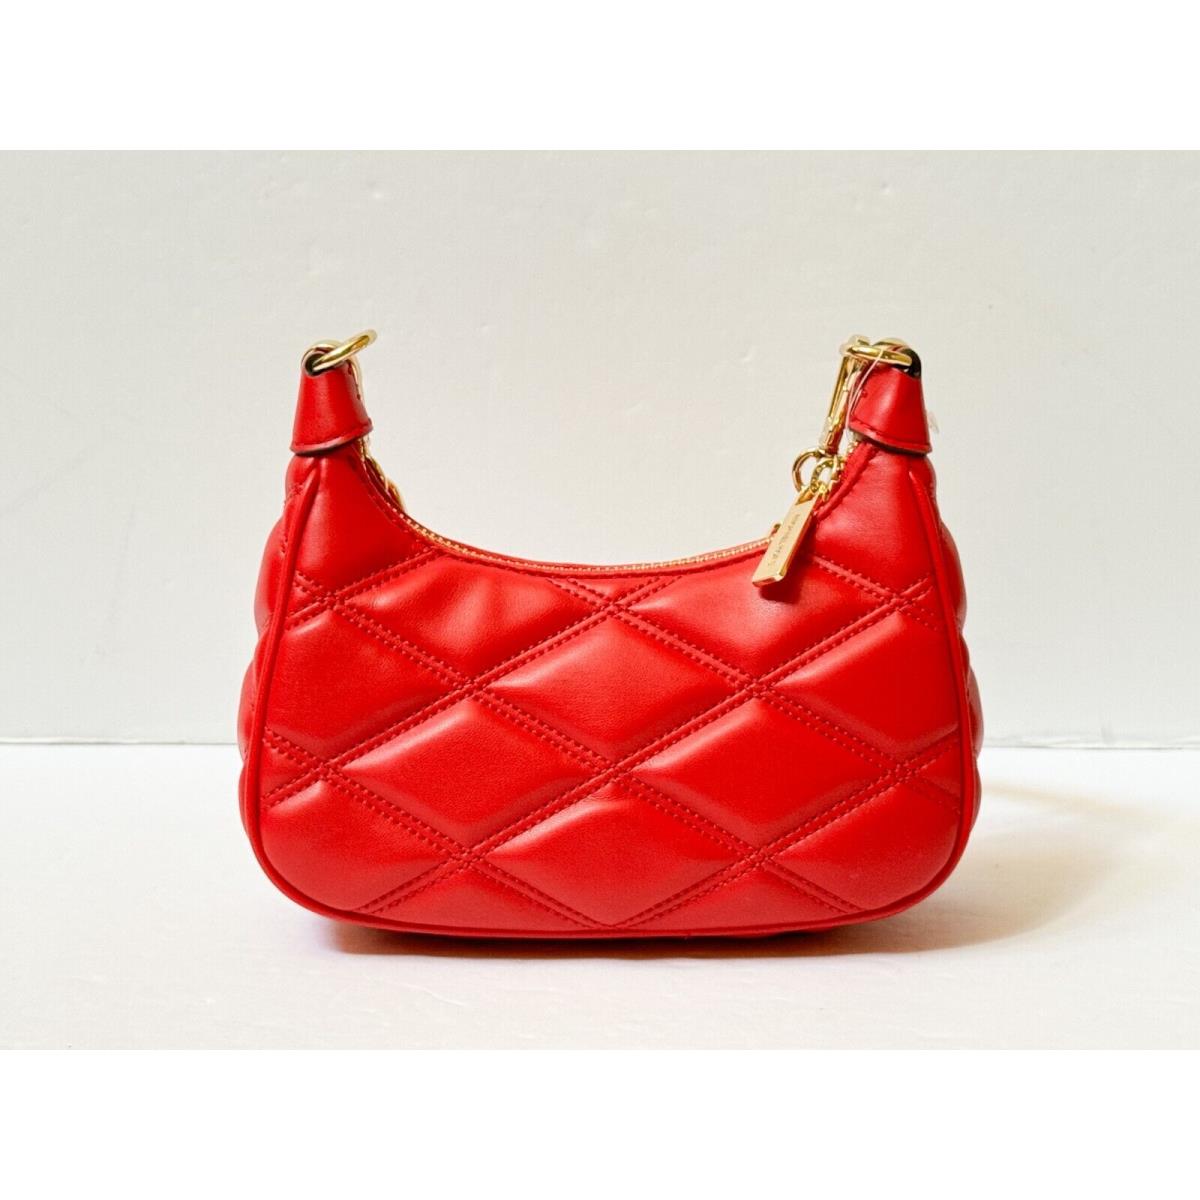 Michael Kors Cora Mini Zip Pouchette Chain Shoulder Crossbody Bag QUILTED BRIGHT RED/GOLD TONED STUDS